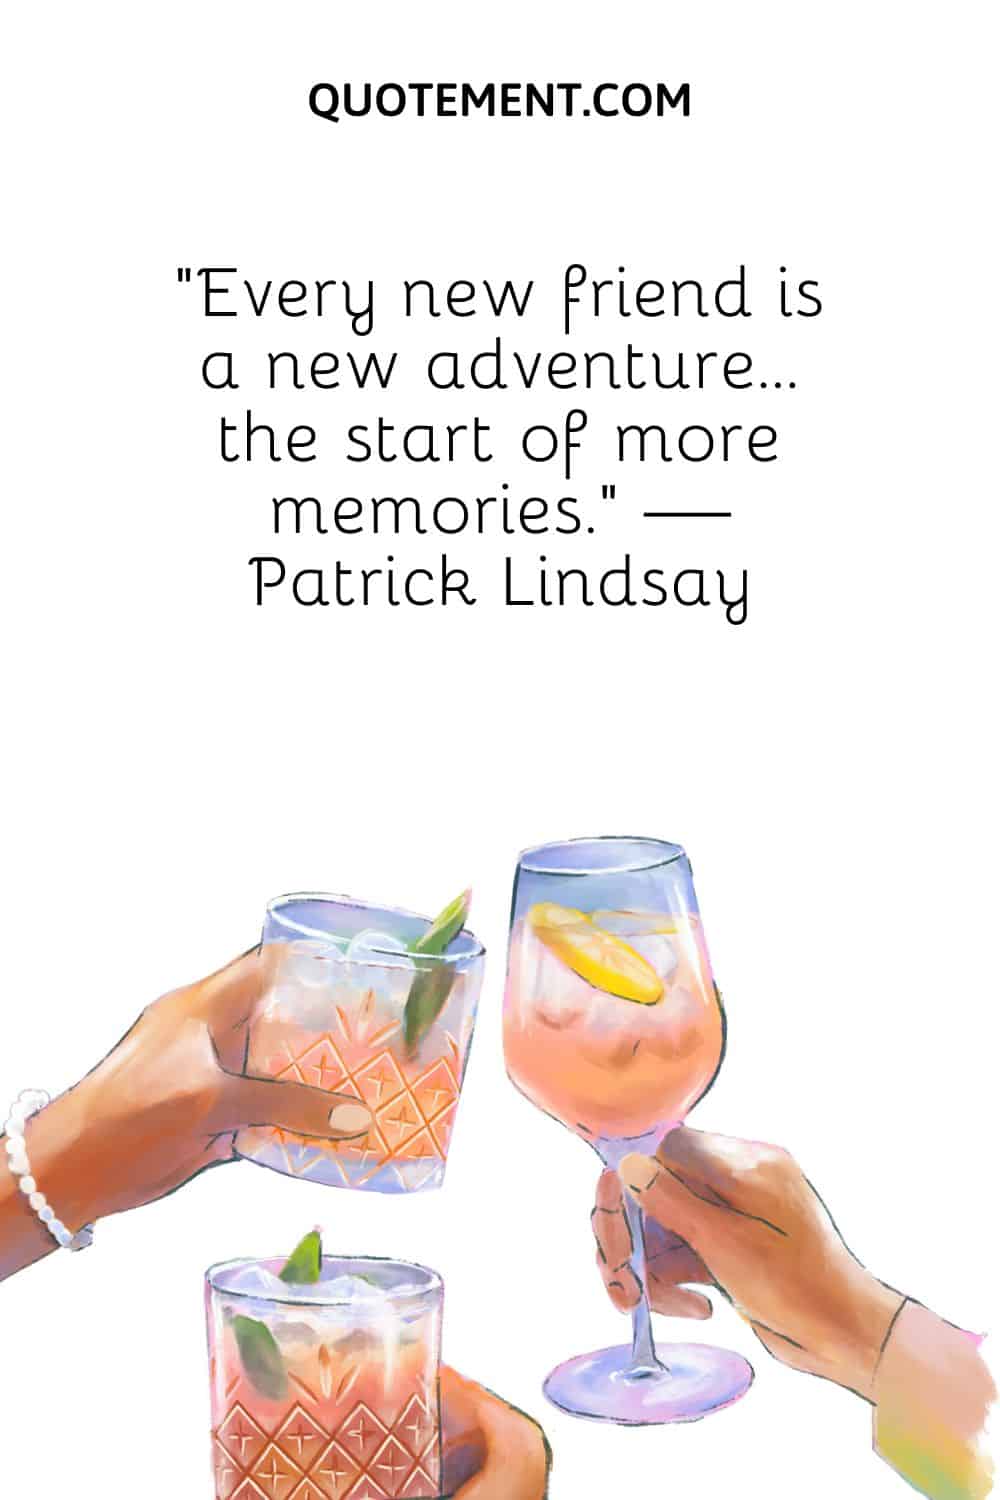 “Every new friend is a new adventure… the start of more memories.” — Patrick Lindsay